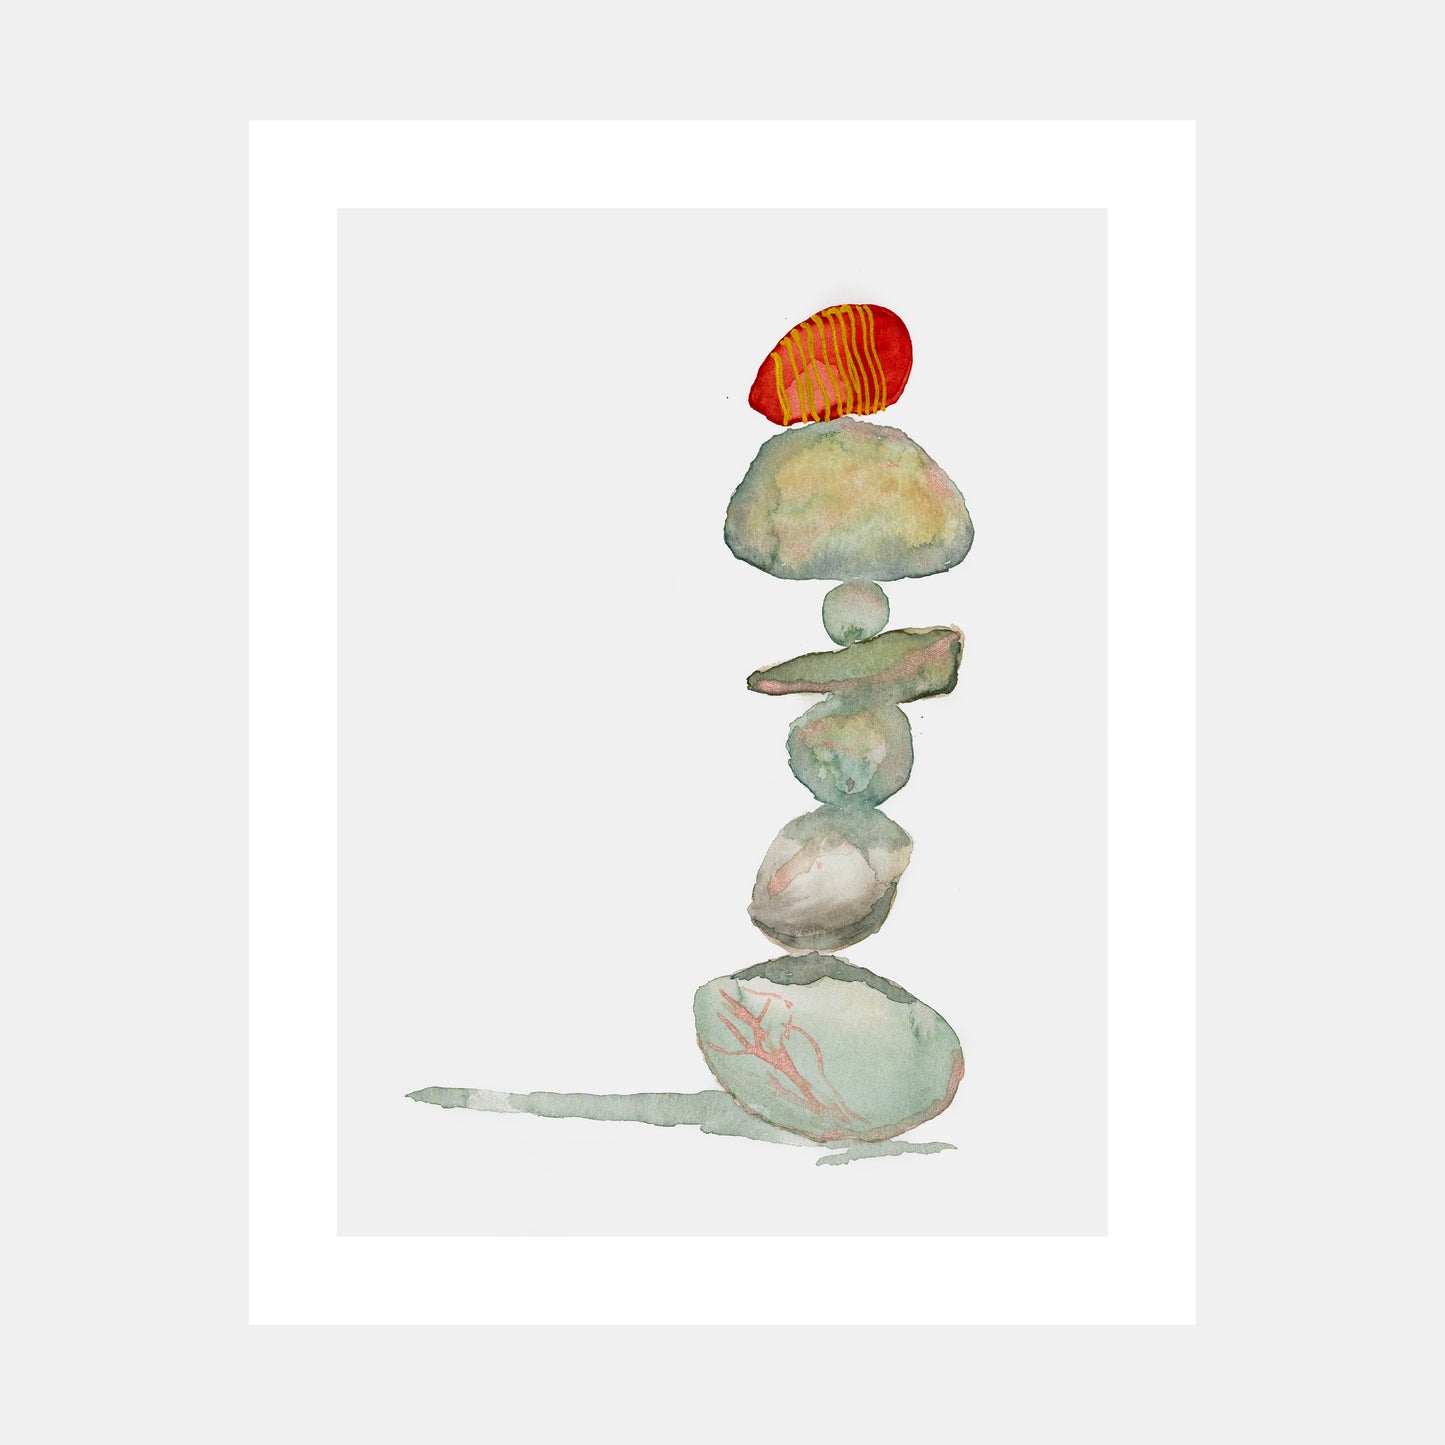 "Make The Connection" Watercolor Print by Teresa Bacon - 11x14 inches by Teresa Bacon - K. A. Artist Shop